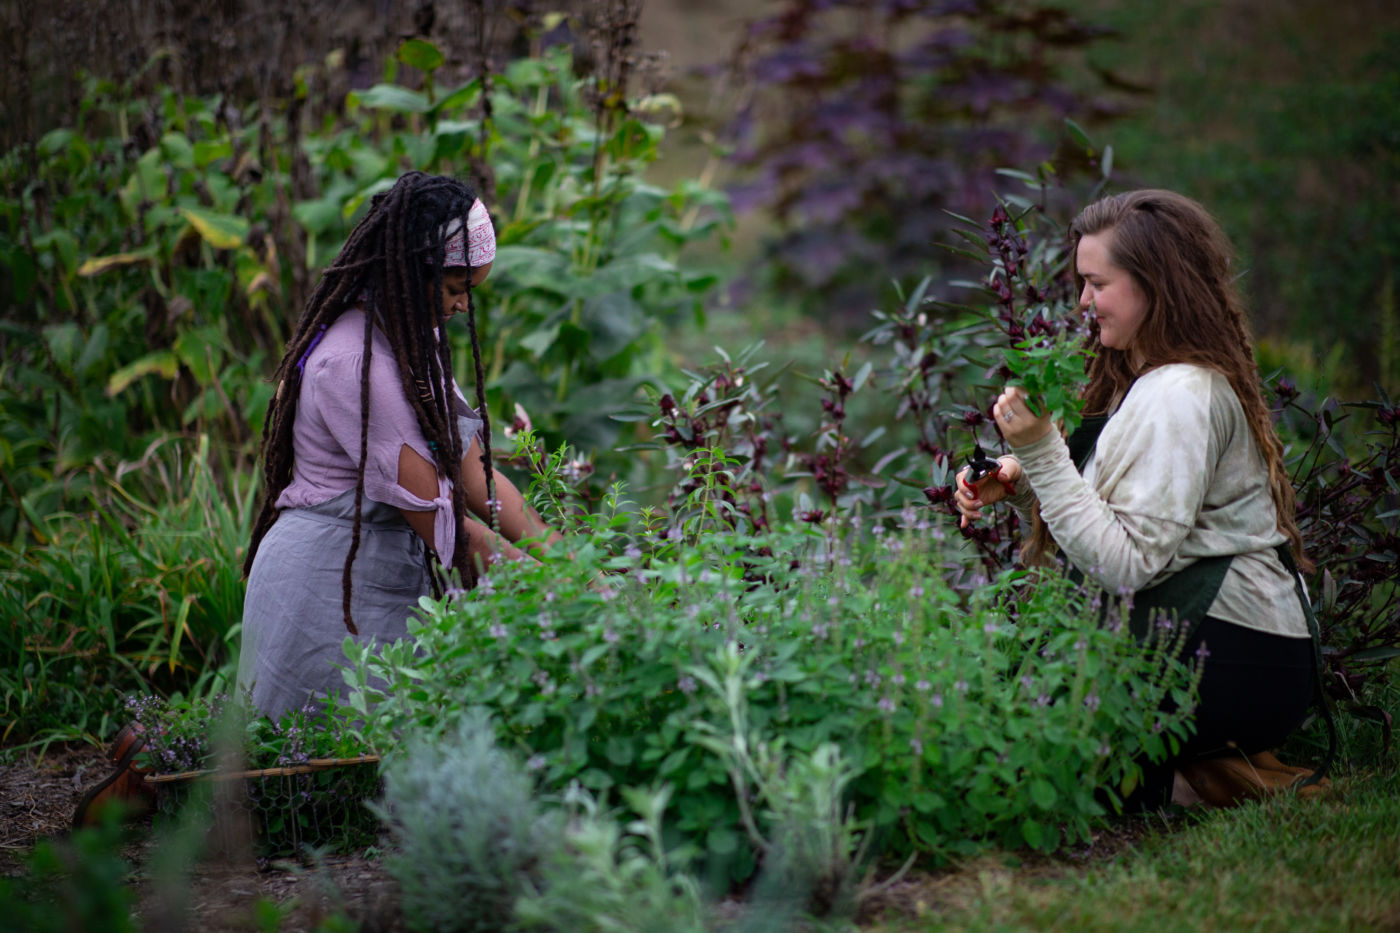 Two people gather herbs outdoors.